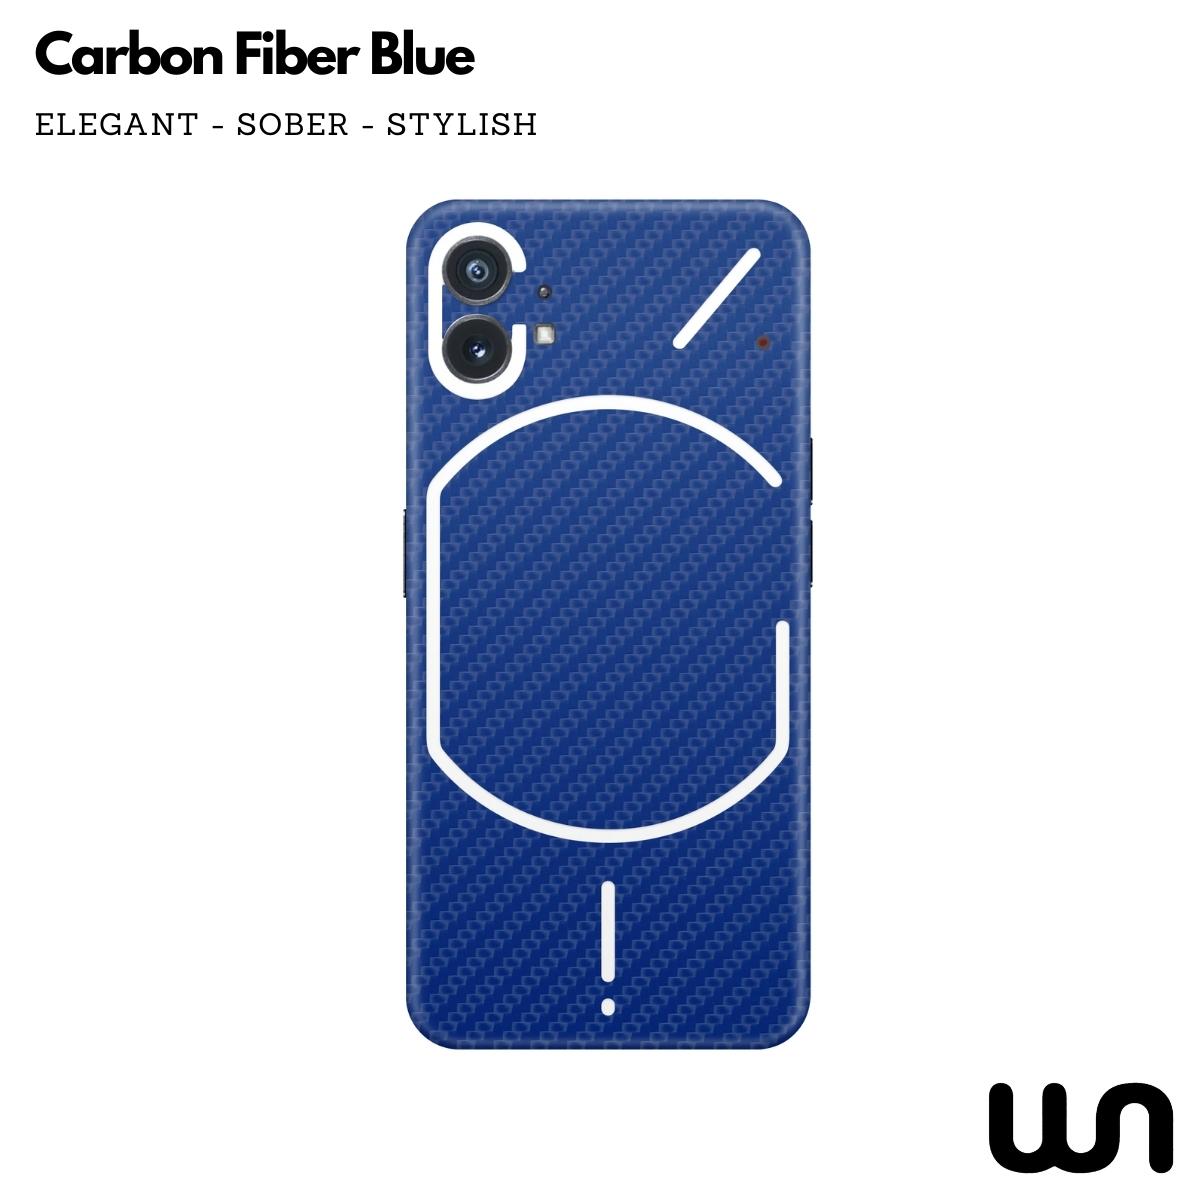 Carbon Fiber Blue Textured Skin for Nothing Phone 1